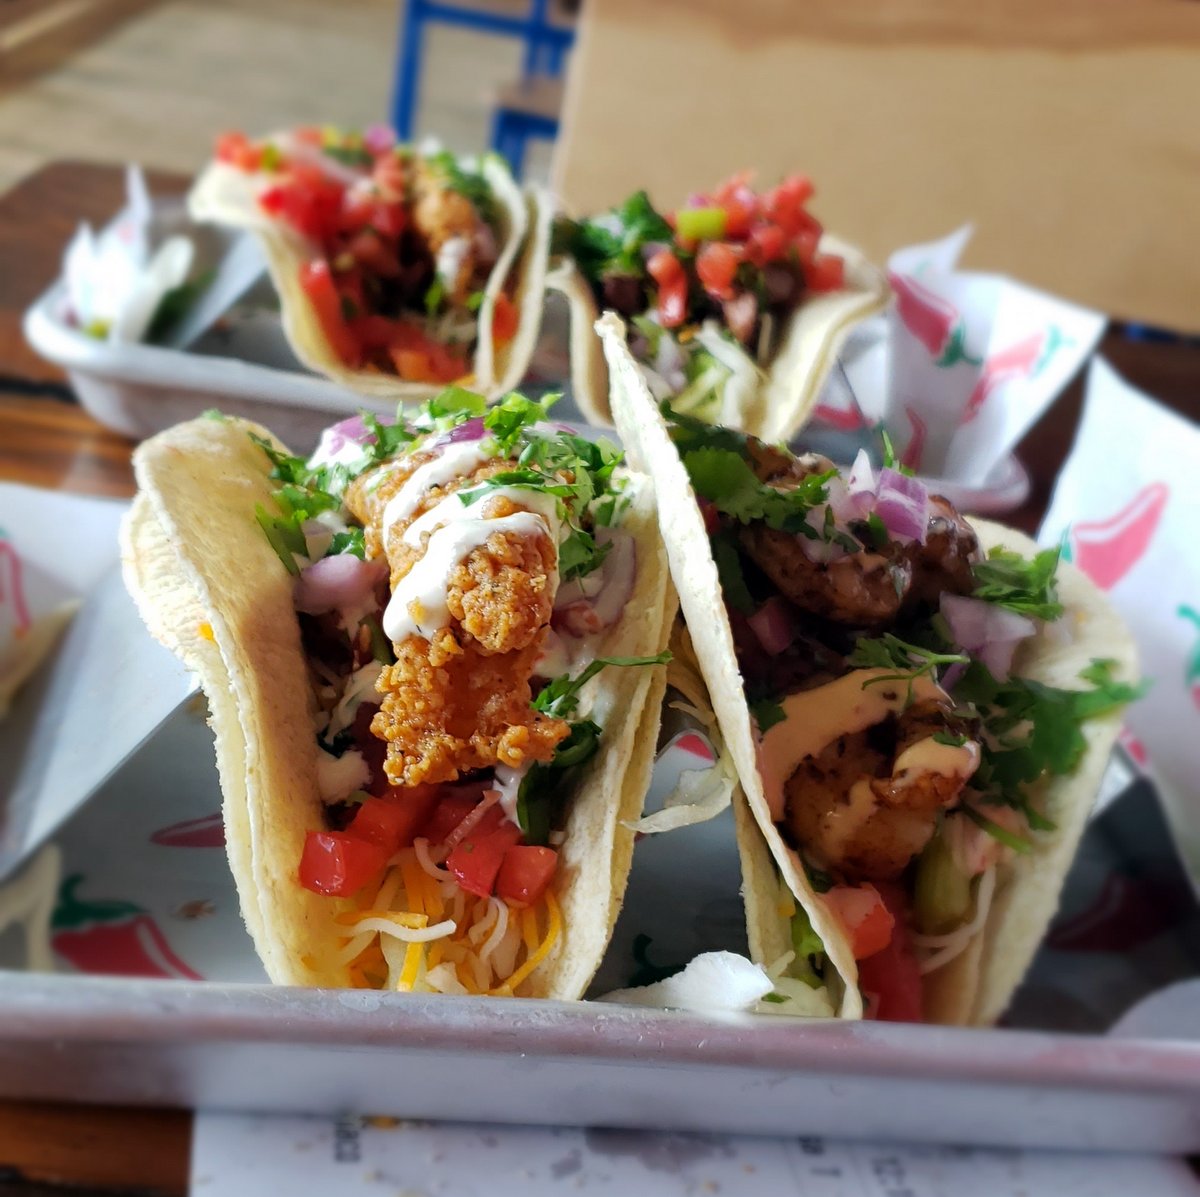 Want Tacos? Head to Silverthorne, Colorado